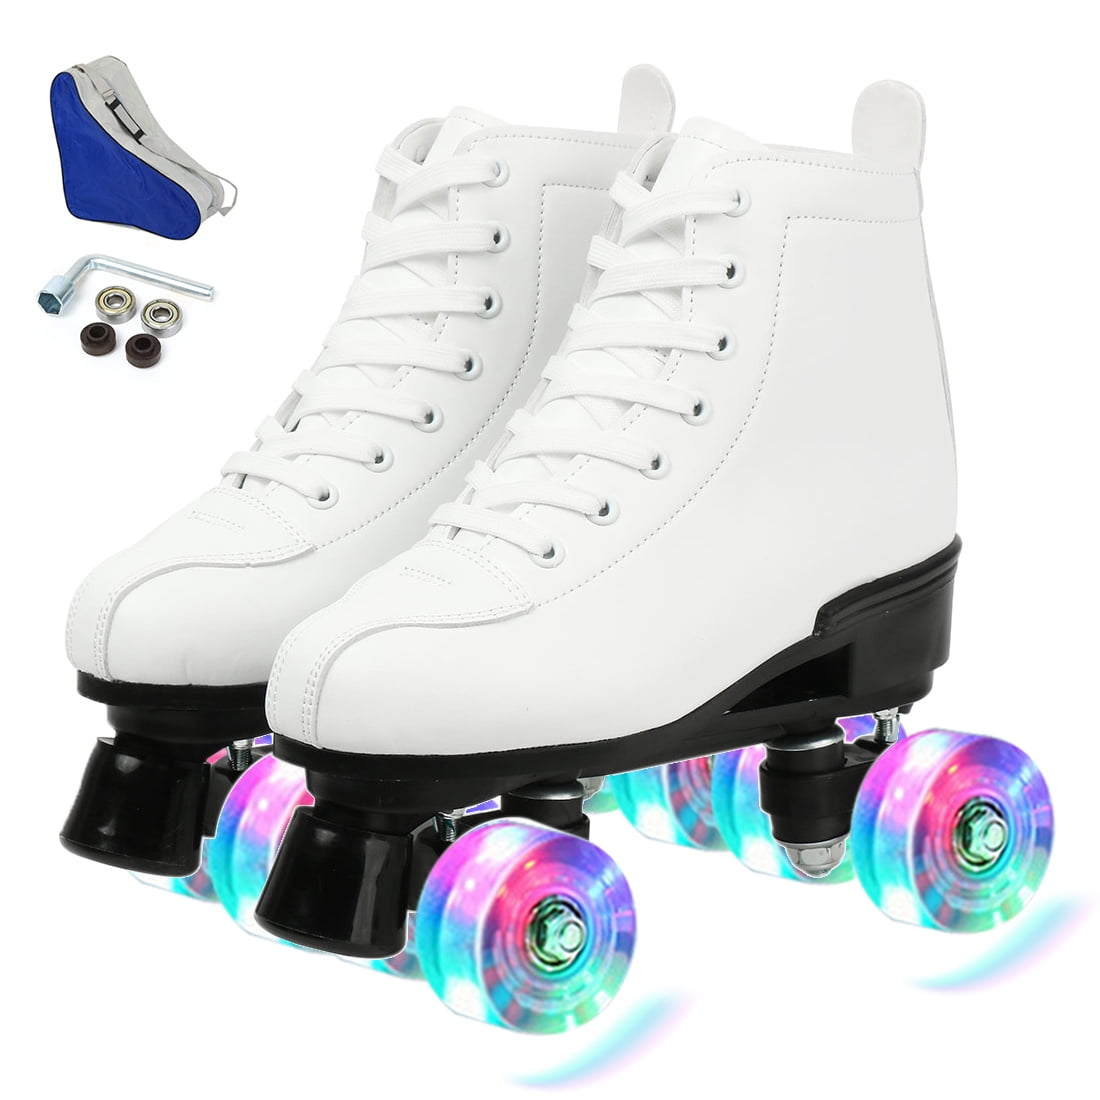 Unisex Roller Skates Outdoor Classic High-top PU Leather Roller Skates for Beginner,Double Row Roller Skates with Shoes Bags for Men Women 